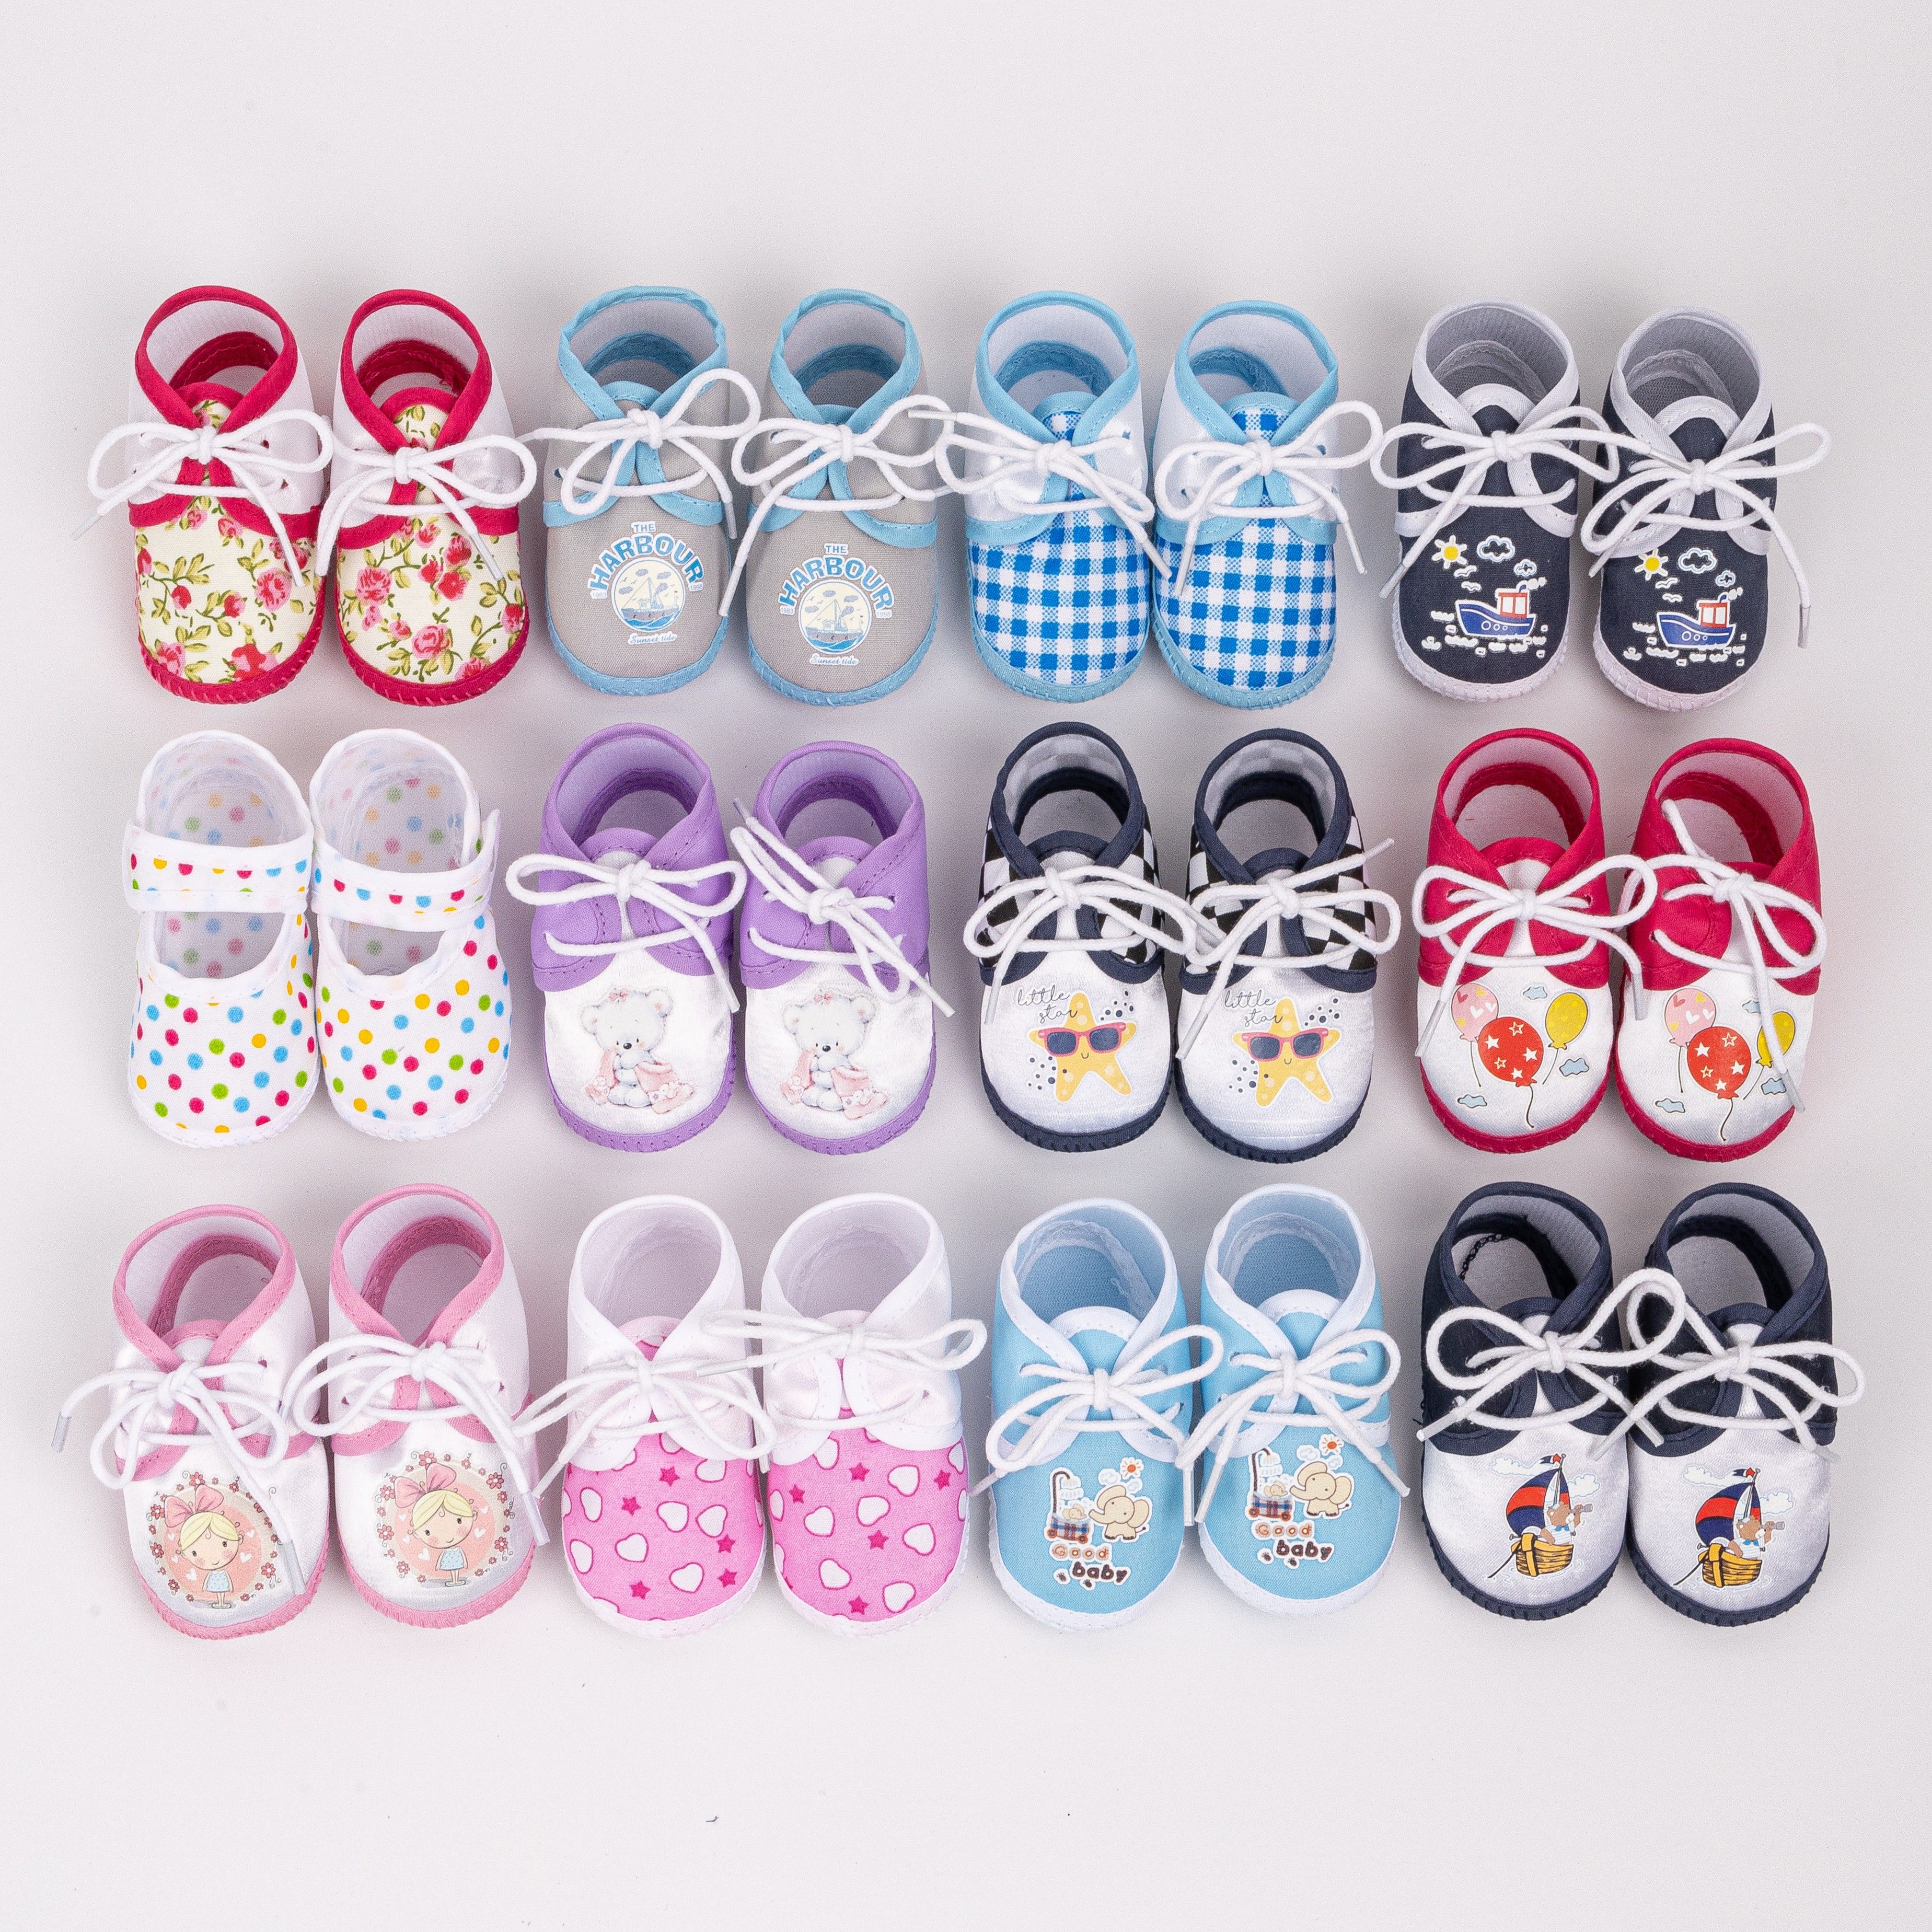 Baby Shower Decoration & Baby Shower Shoes Set